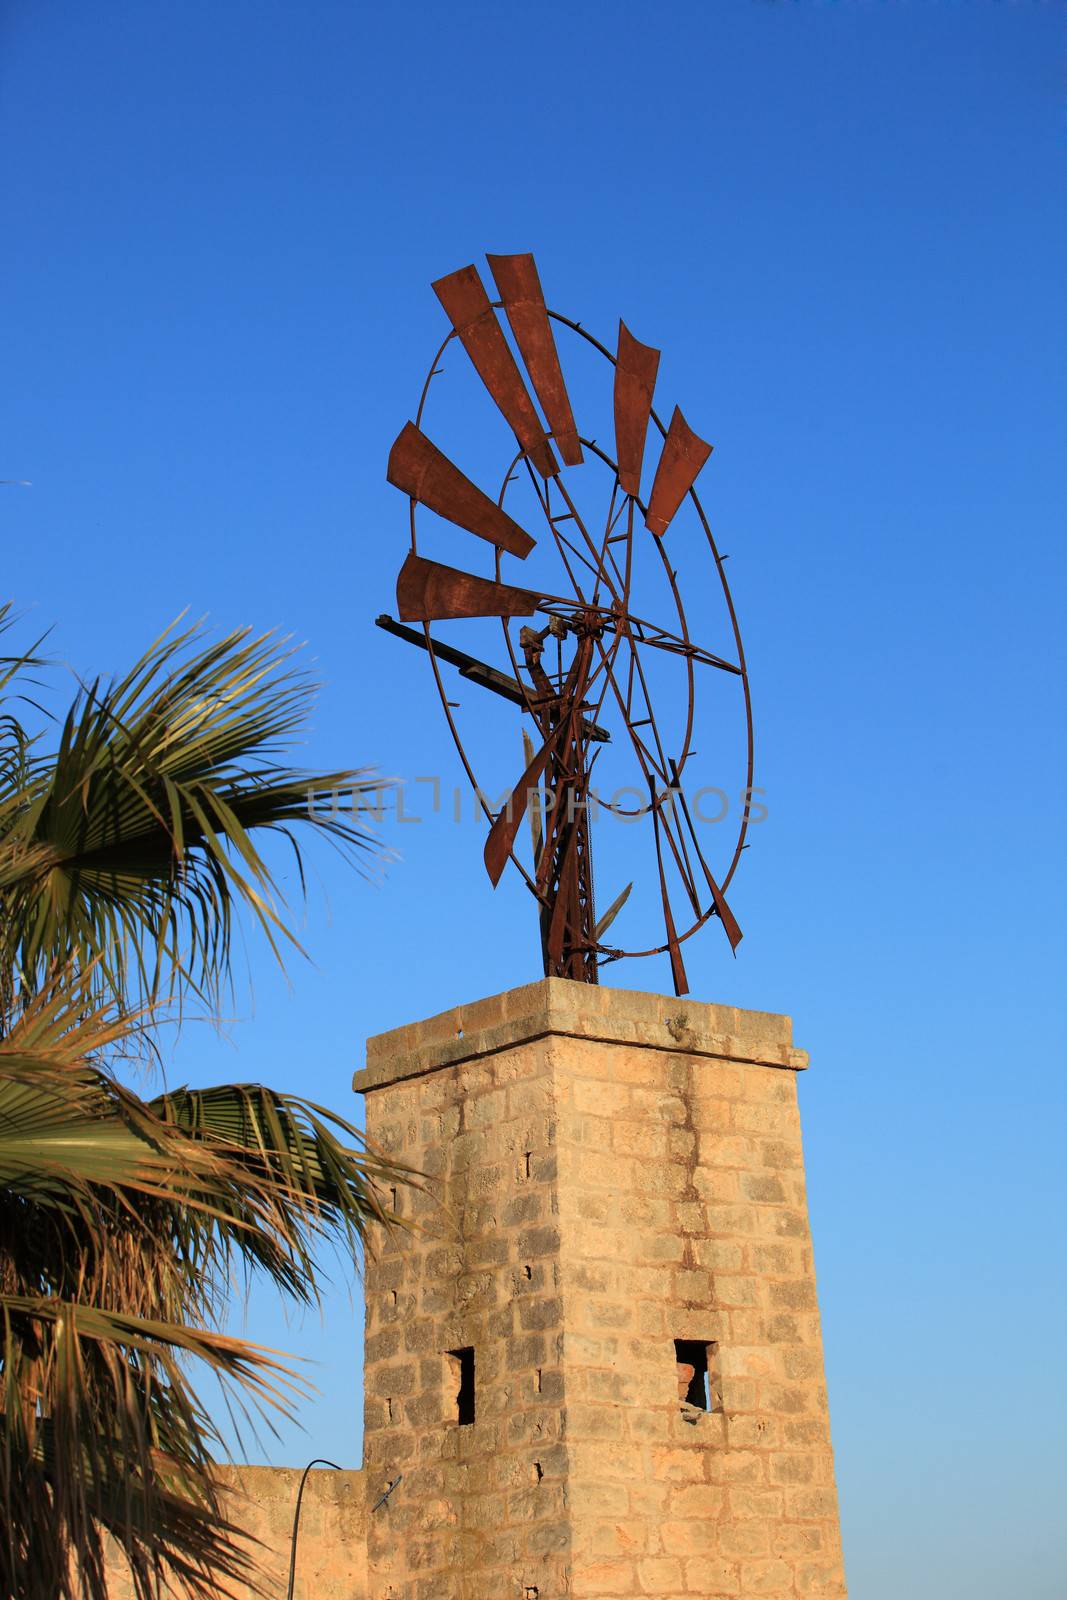 Old broken down windmill with missing vanes mounted on top of an old stone building